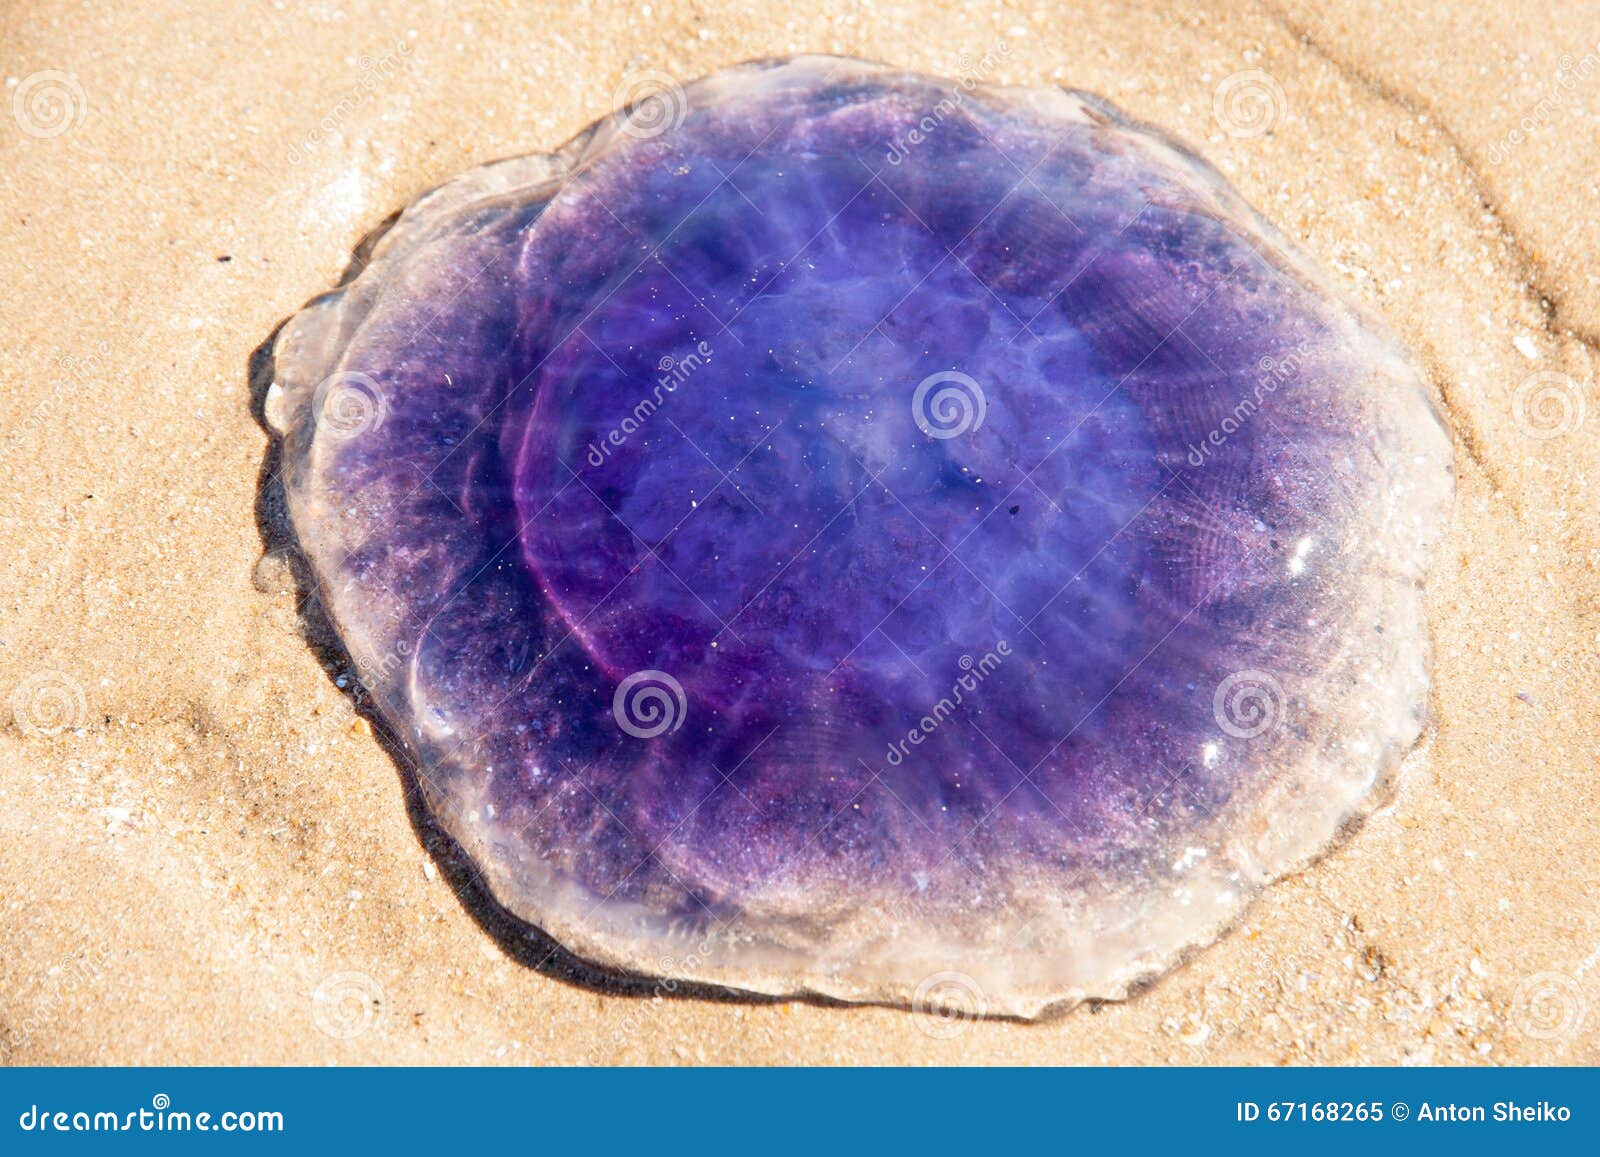 Blue Jellyfish Washed Up On Normandy Sand Beach Stock Image Image Of Yellow Sand